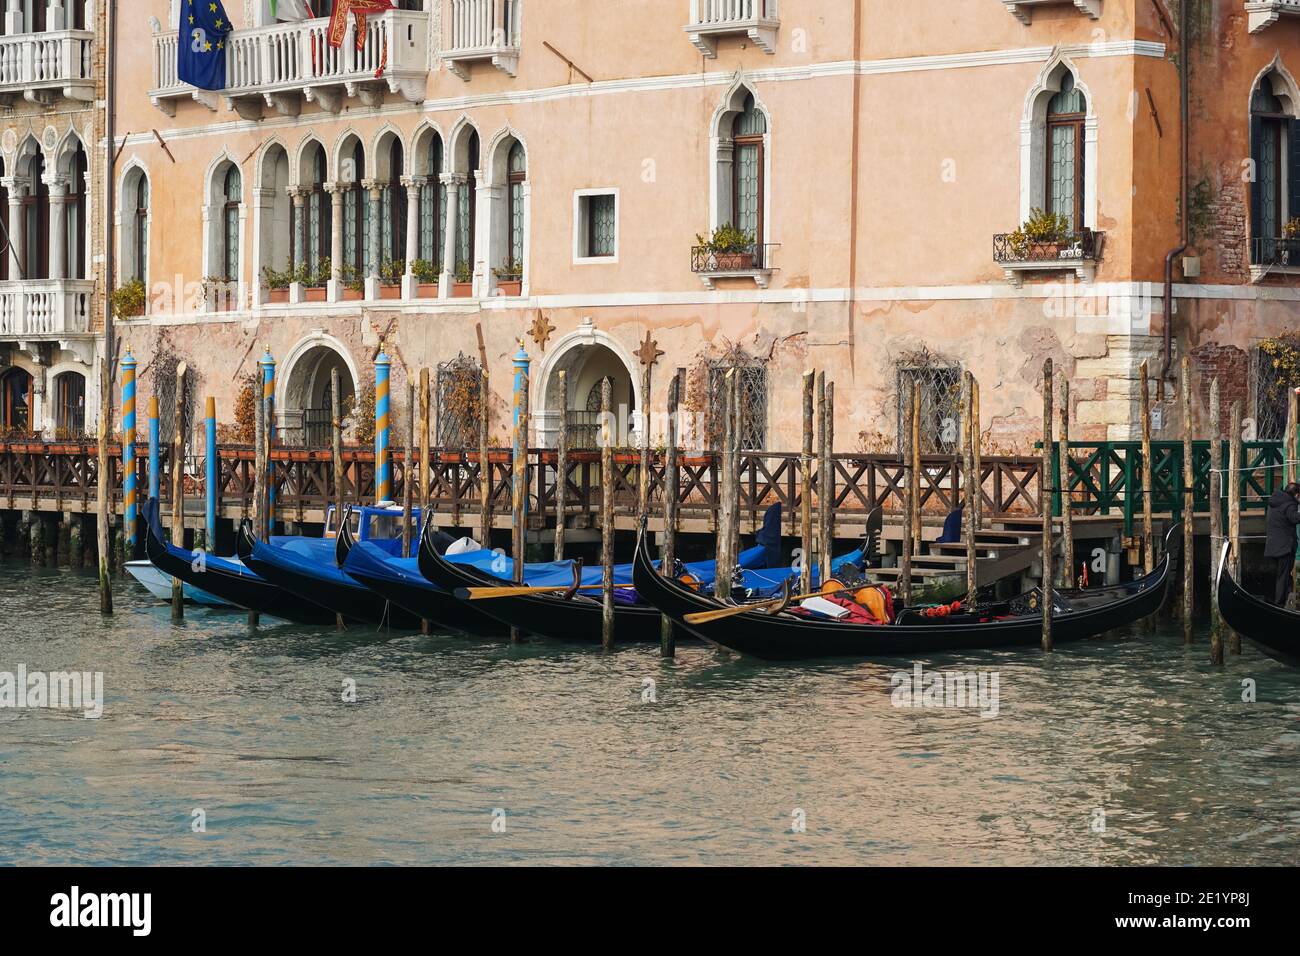 Traditional Venetian gondolas moored on Grand Canal in Venice, Italy Stock Photo